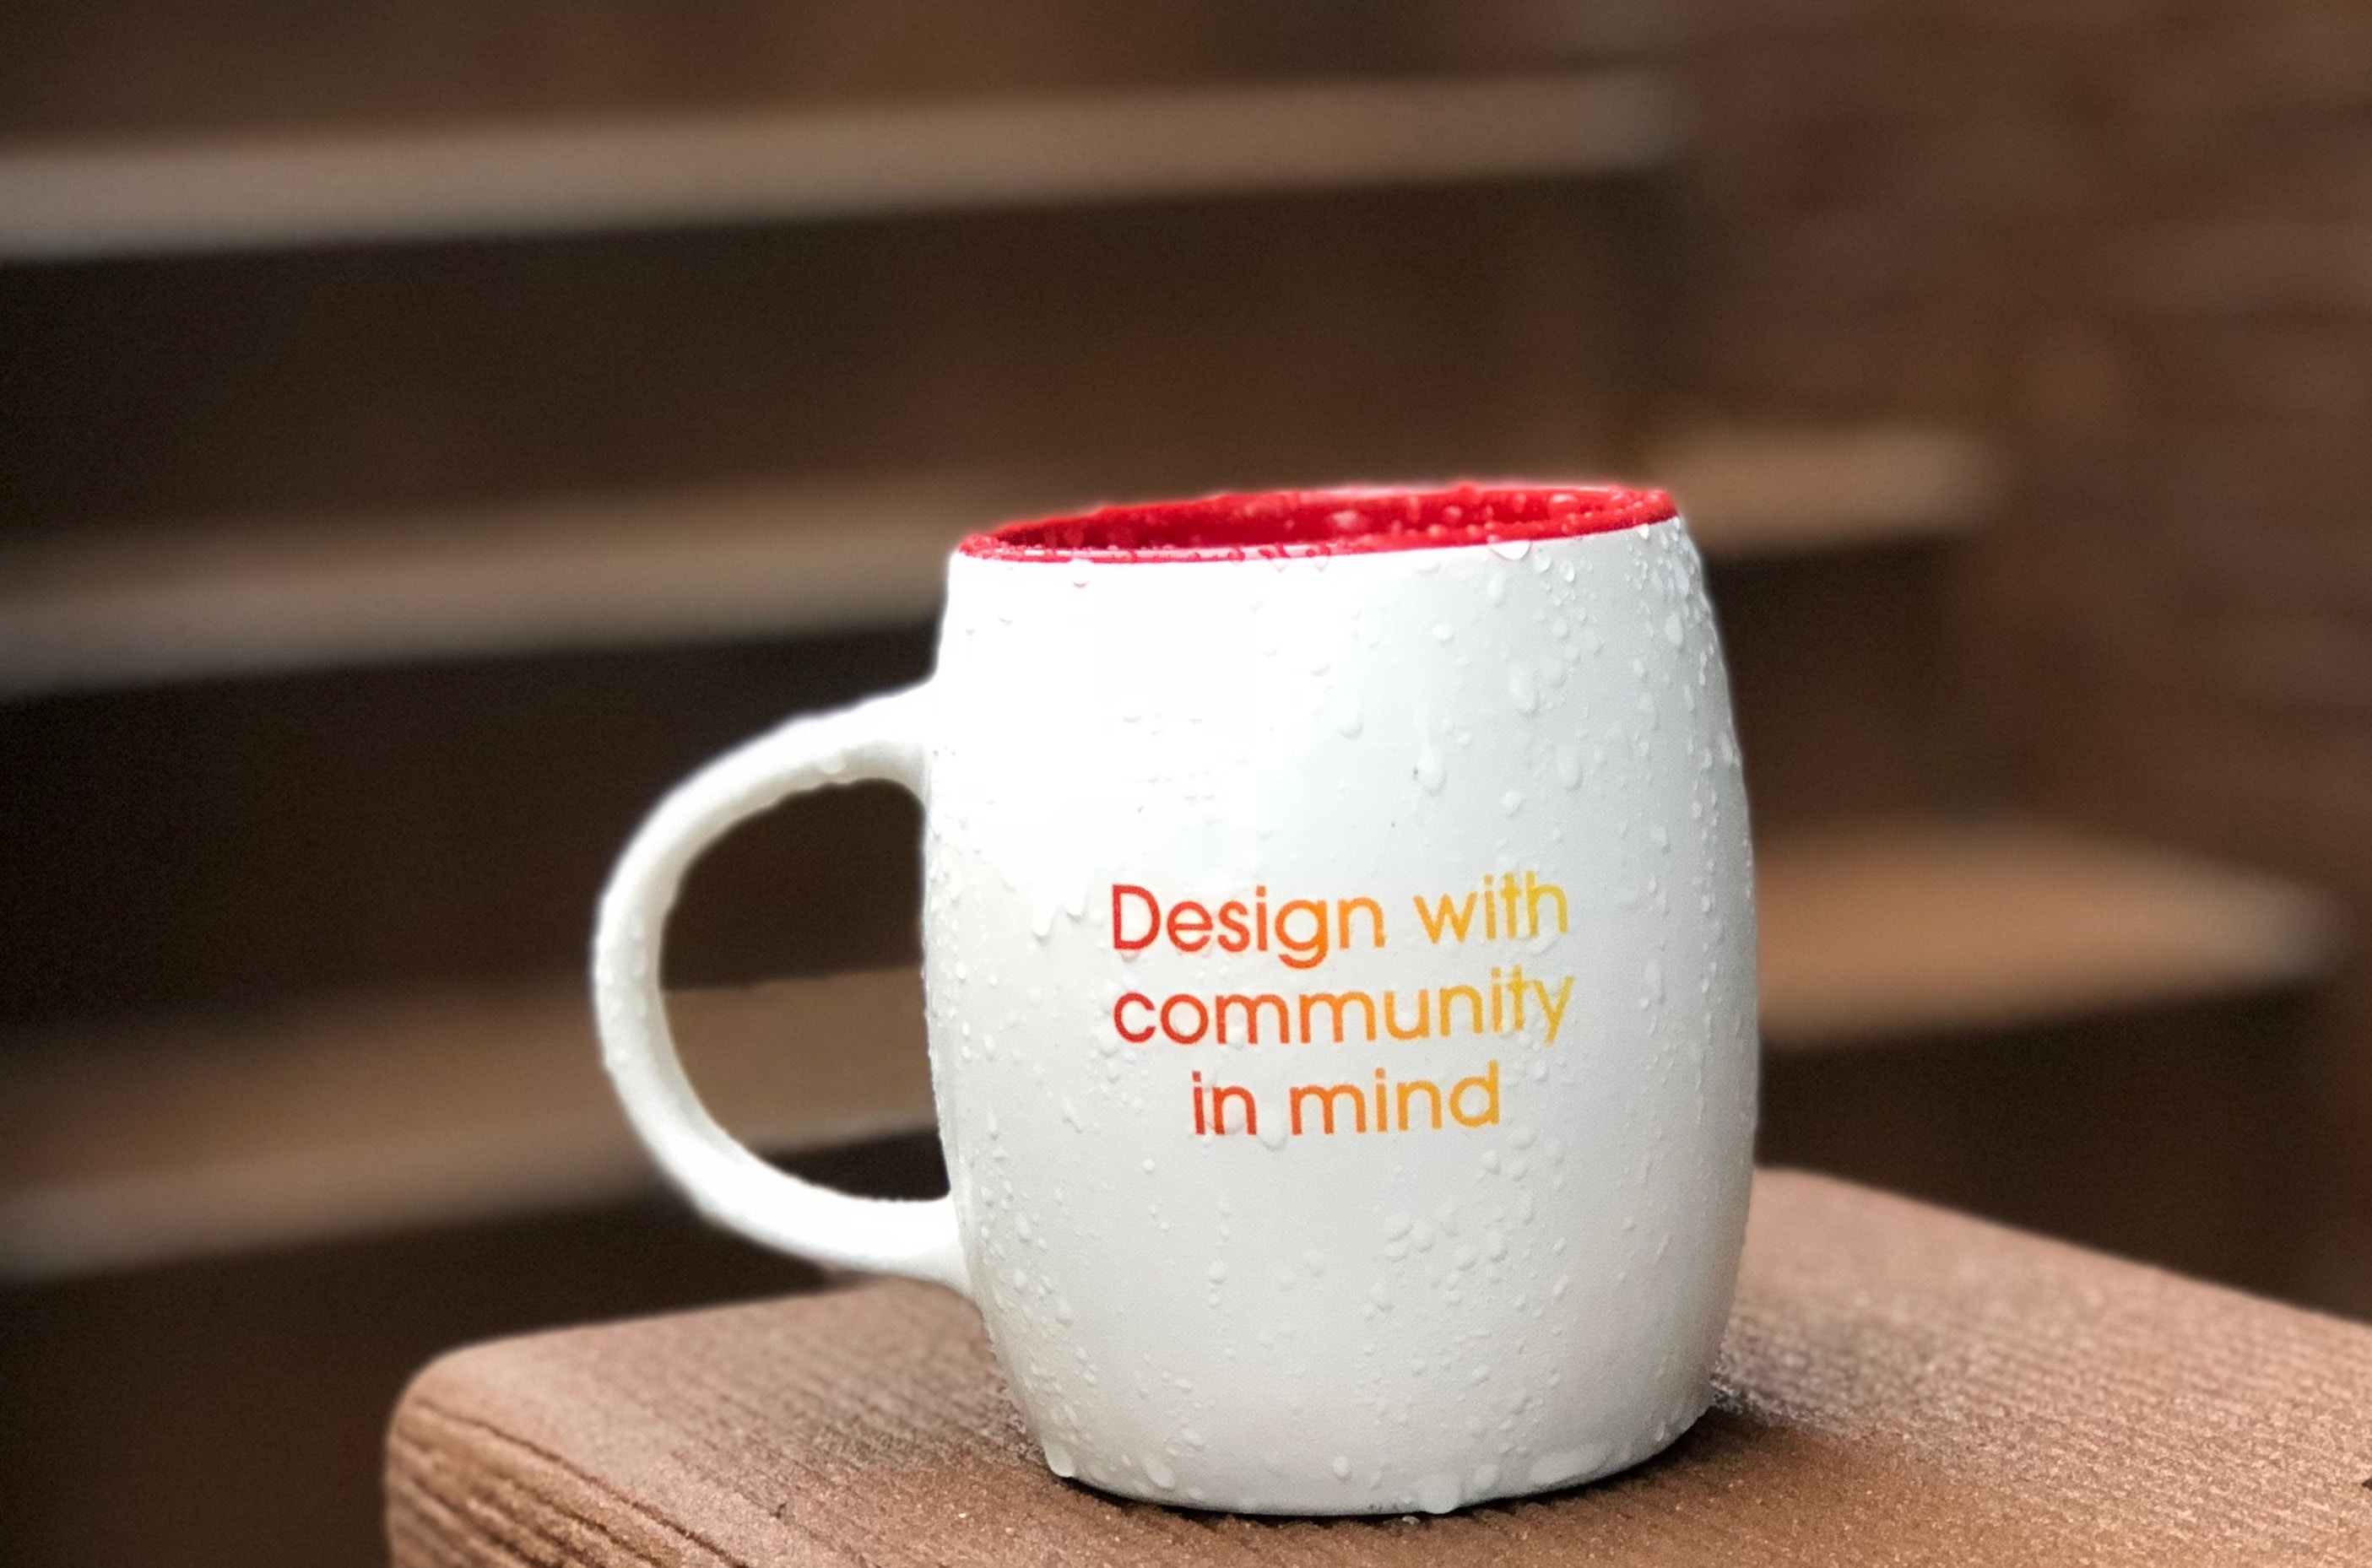 Mug that says "design with community in mind"